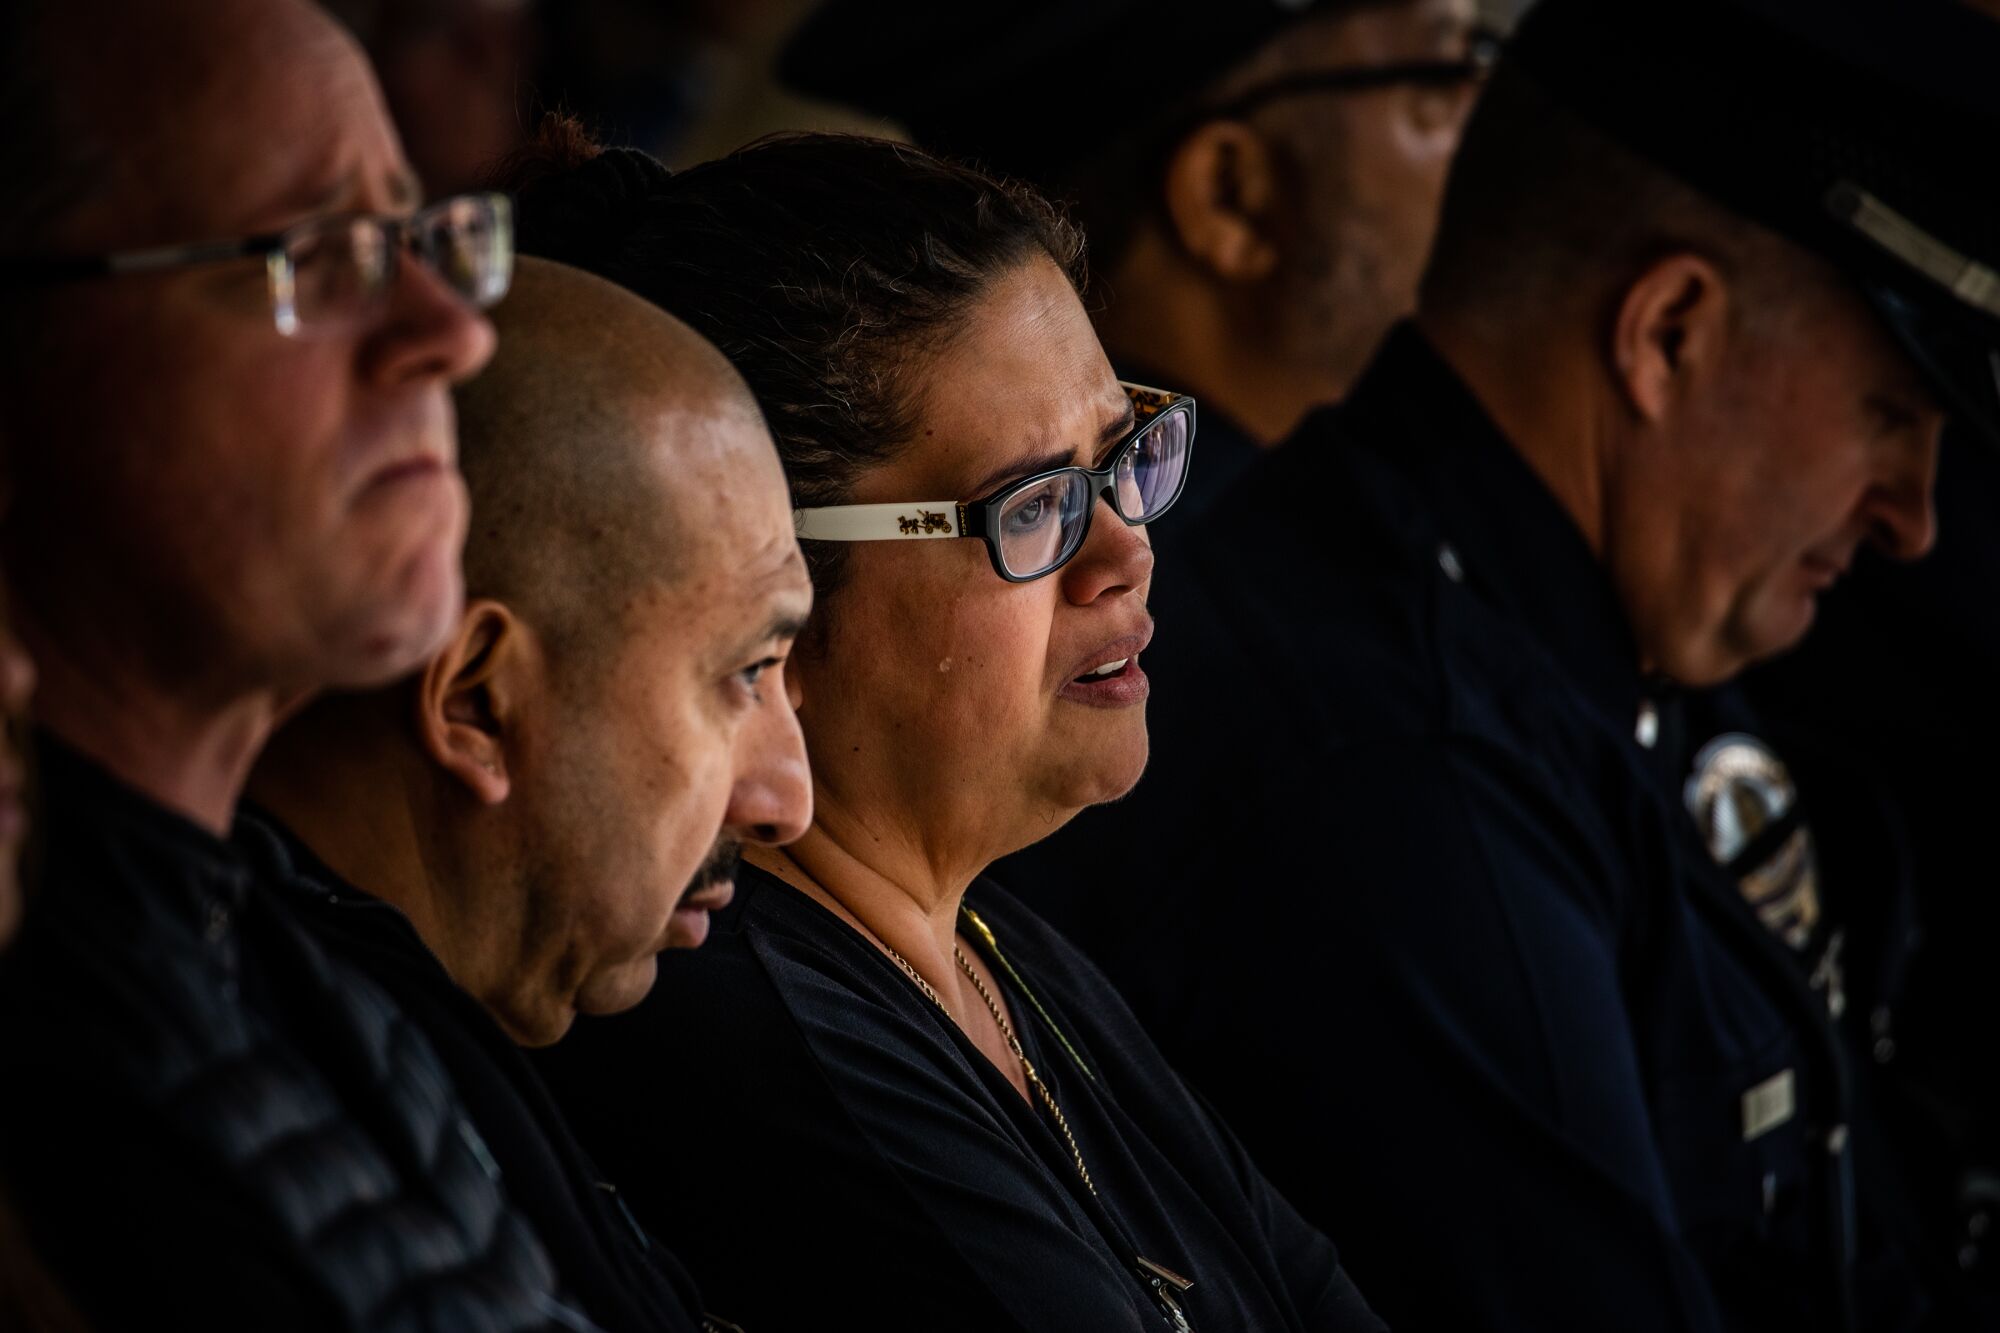 A woman cries while seated in a row of people; all wearing black.